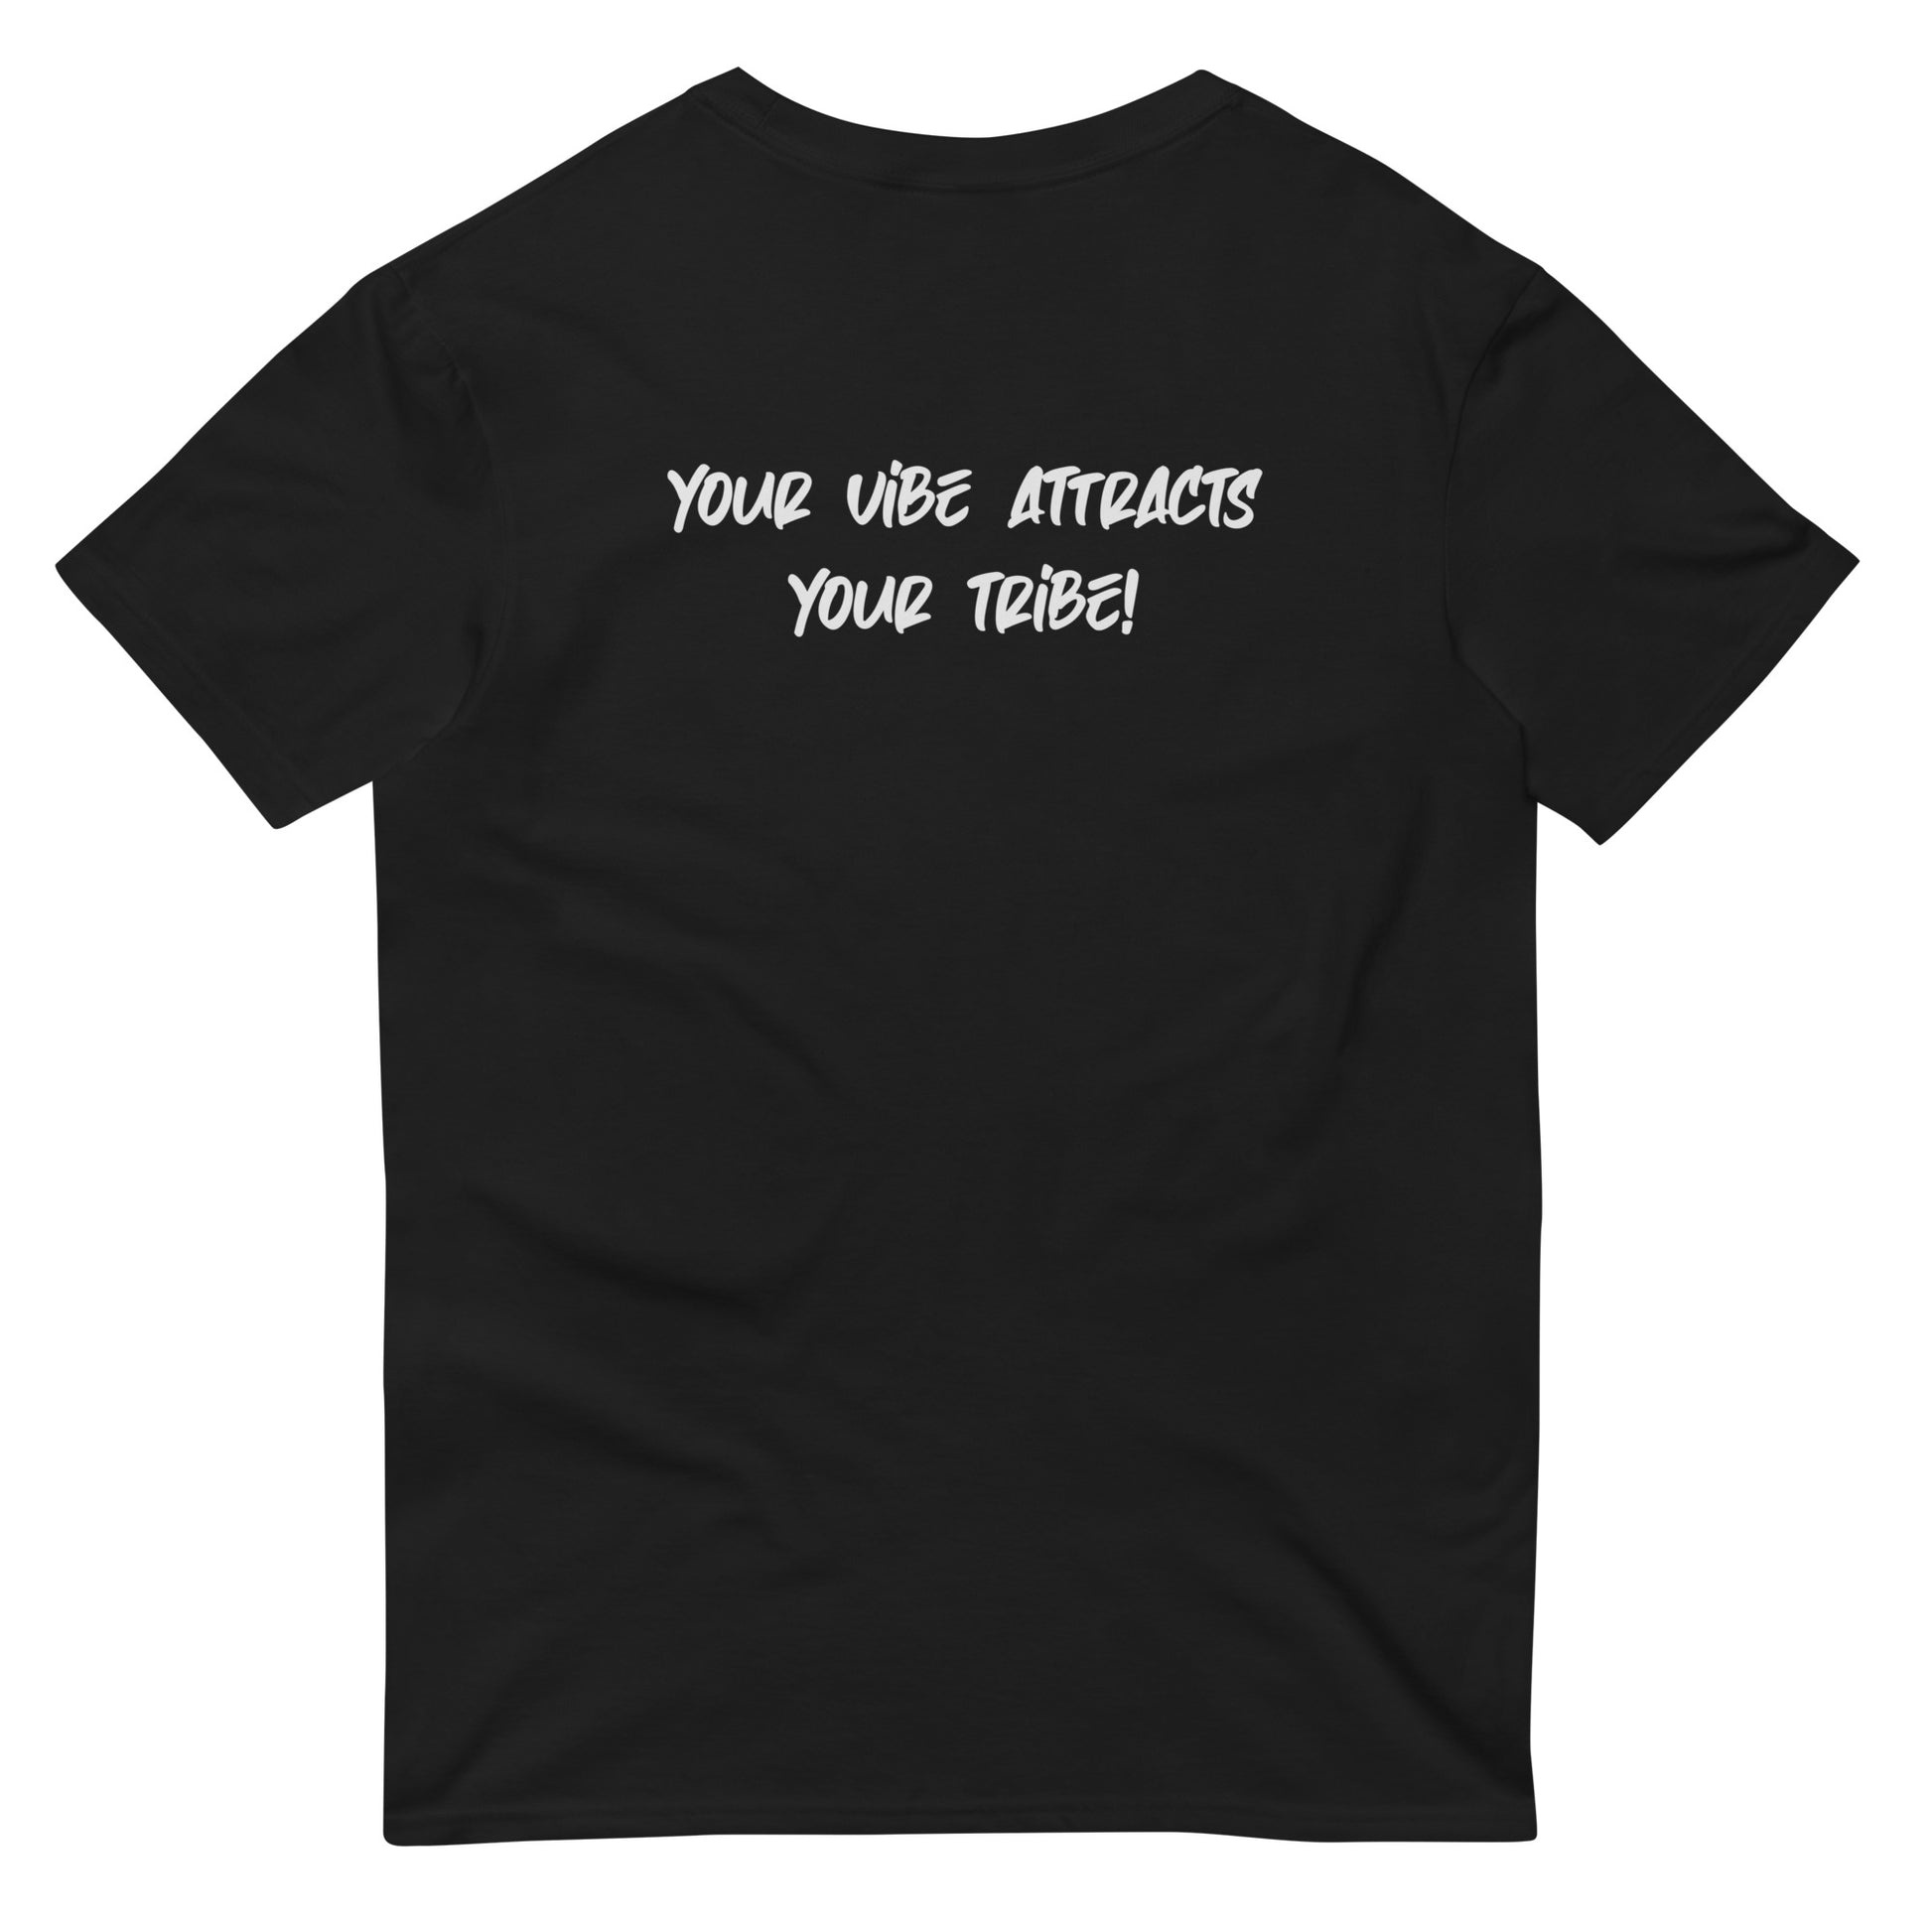 Inspirational 'Tribe Eye - Your Vibe Attracts Your Tribe' t-shirt, with a compelling design that resonates with the wearer's personal aura and community spirit.